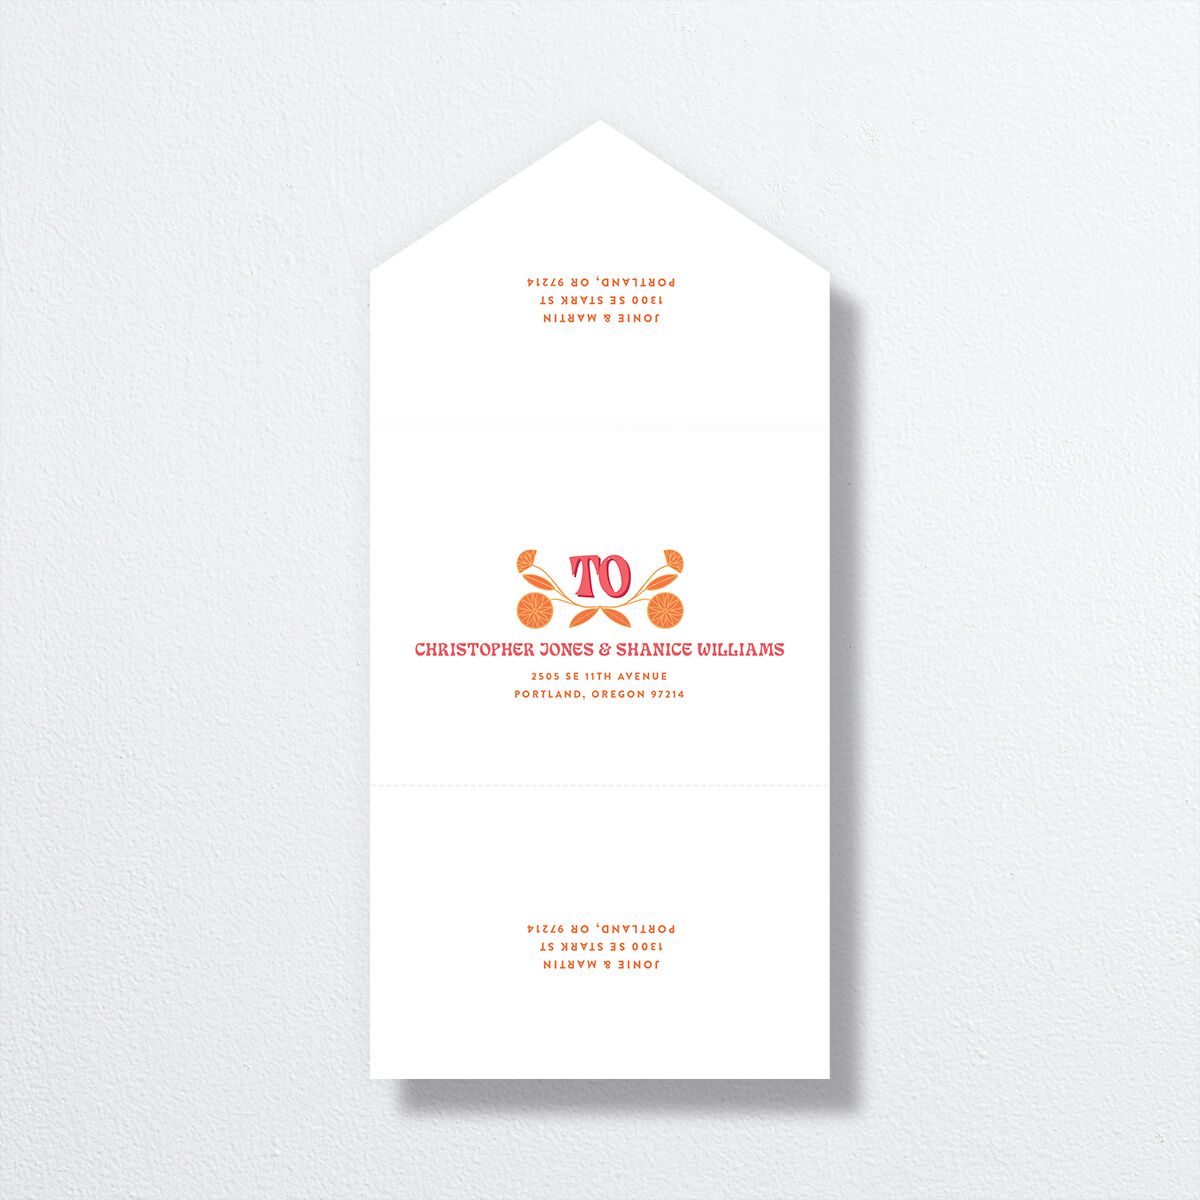 Wedstock All-in-One Wedding Invitations back